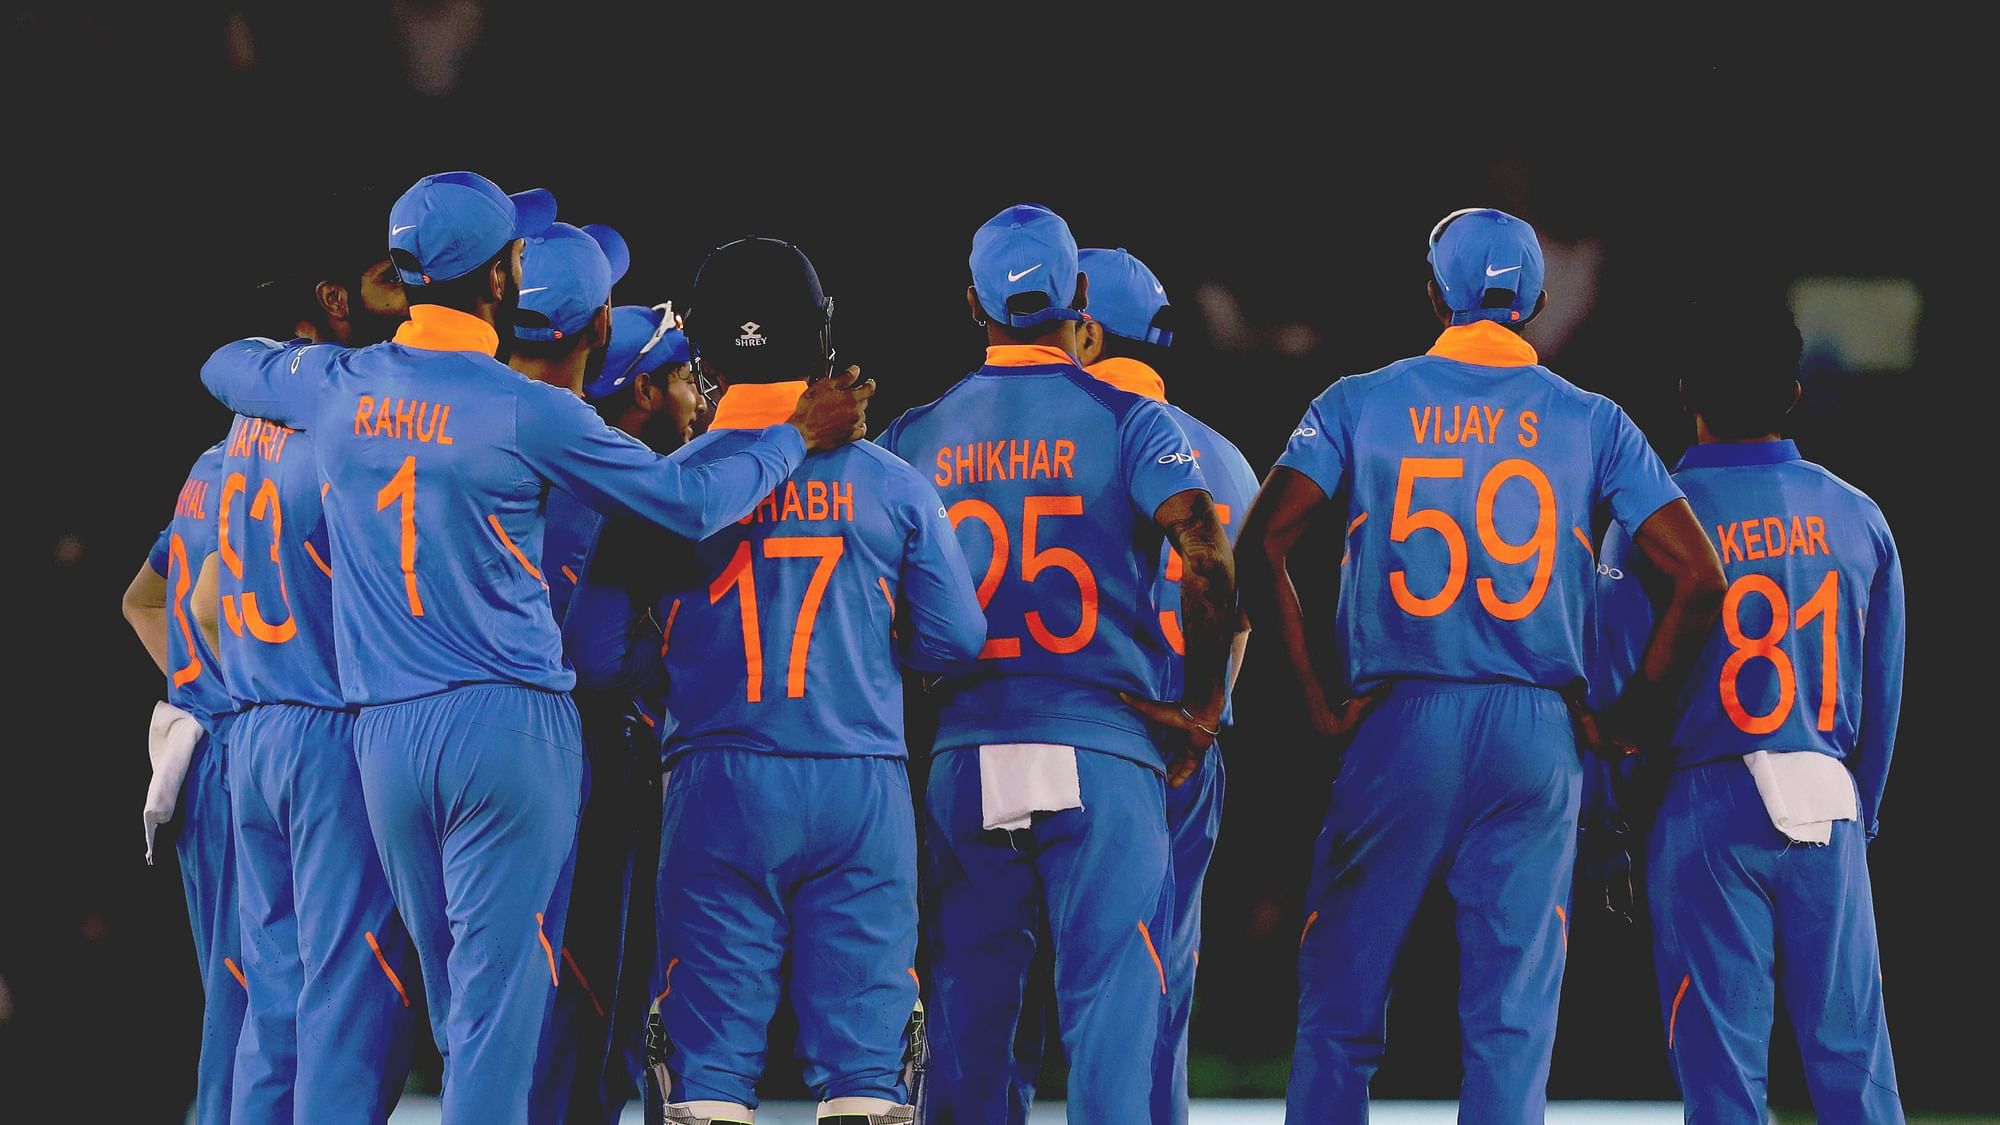 India lost the five match ODI series 3-2 to Australia on Wednesday in Delhi.